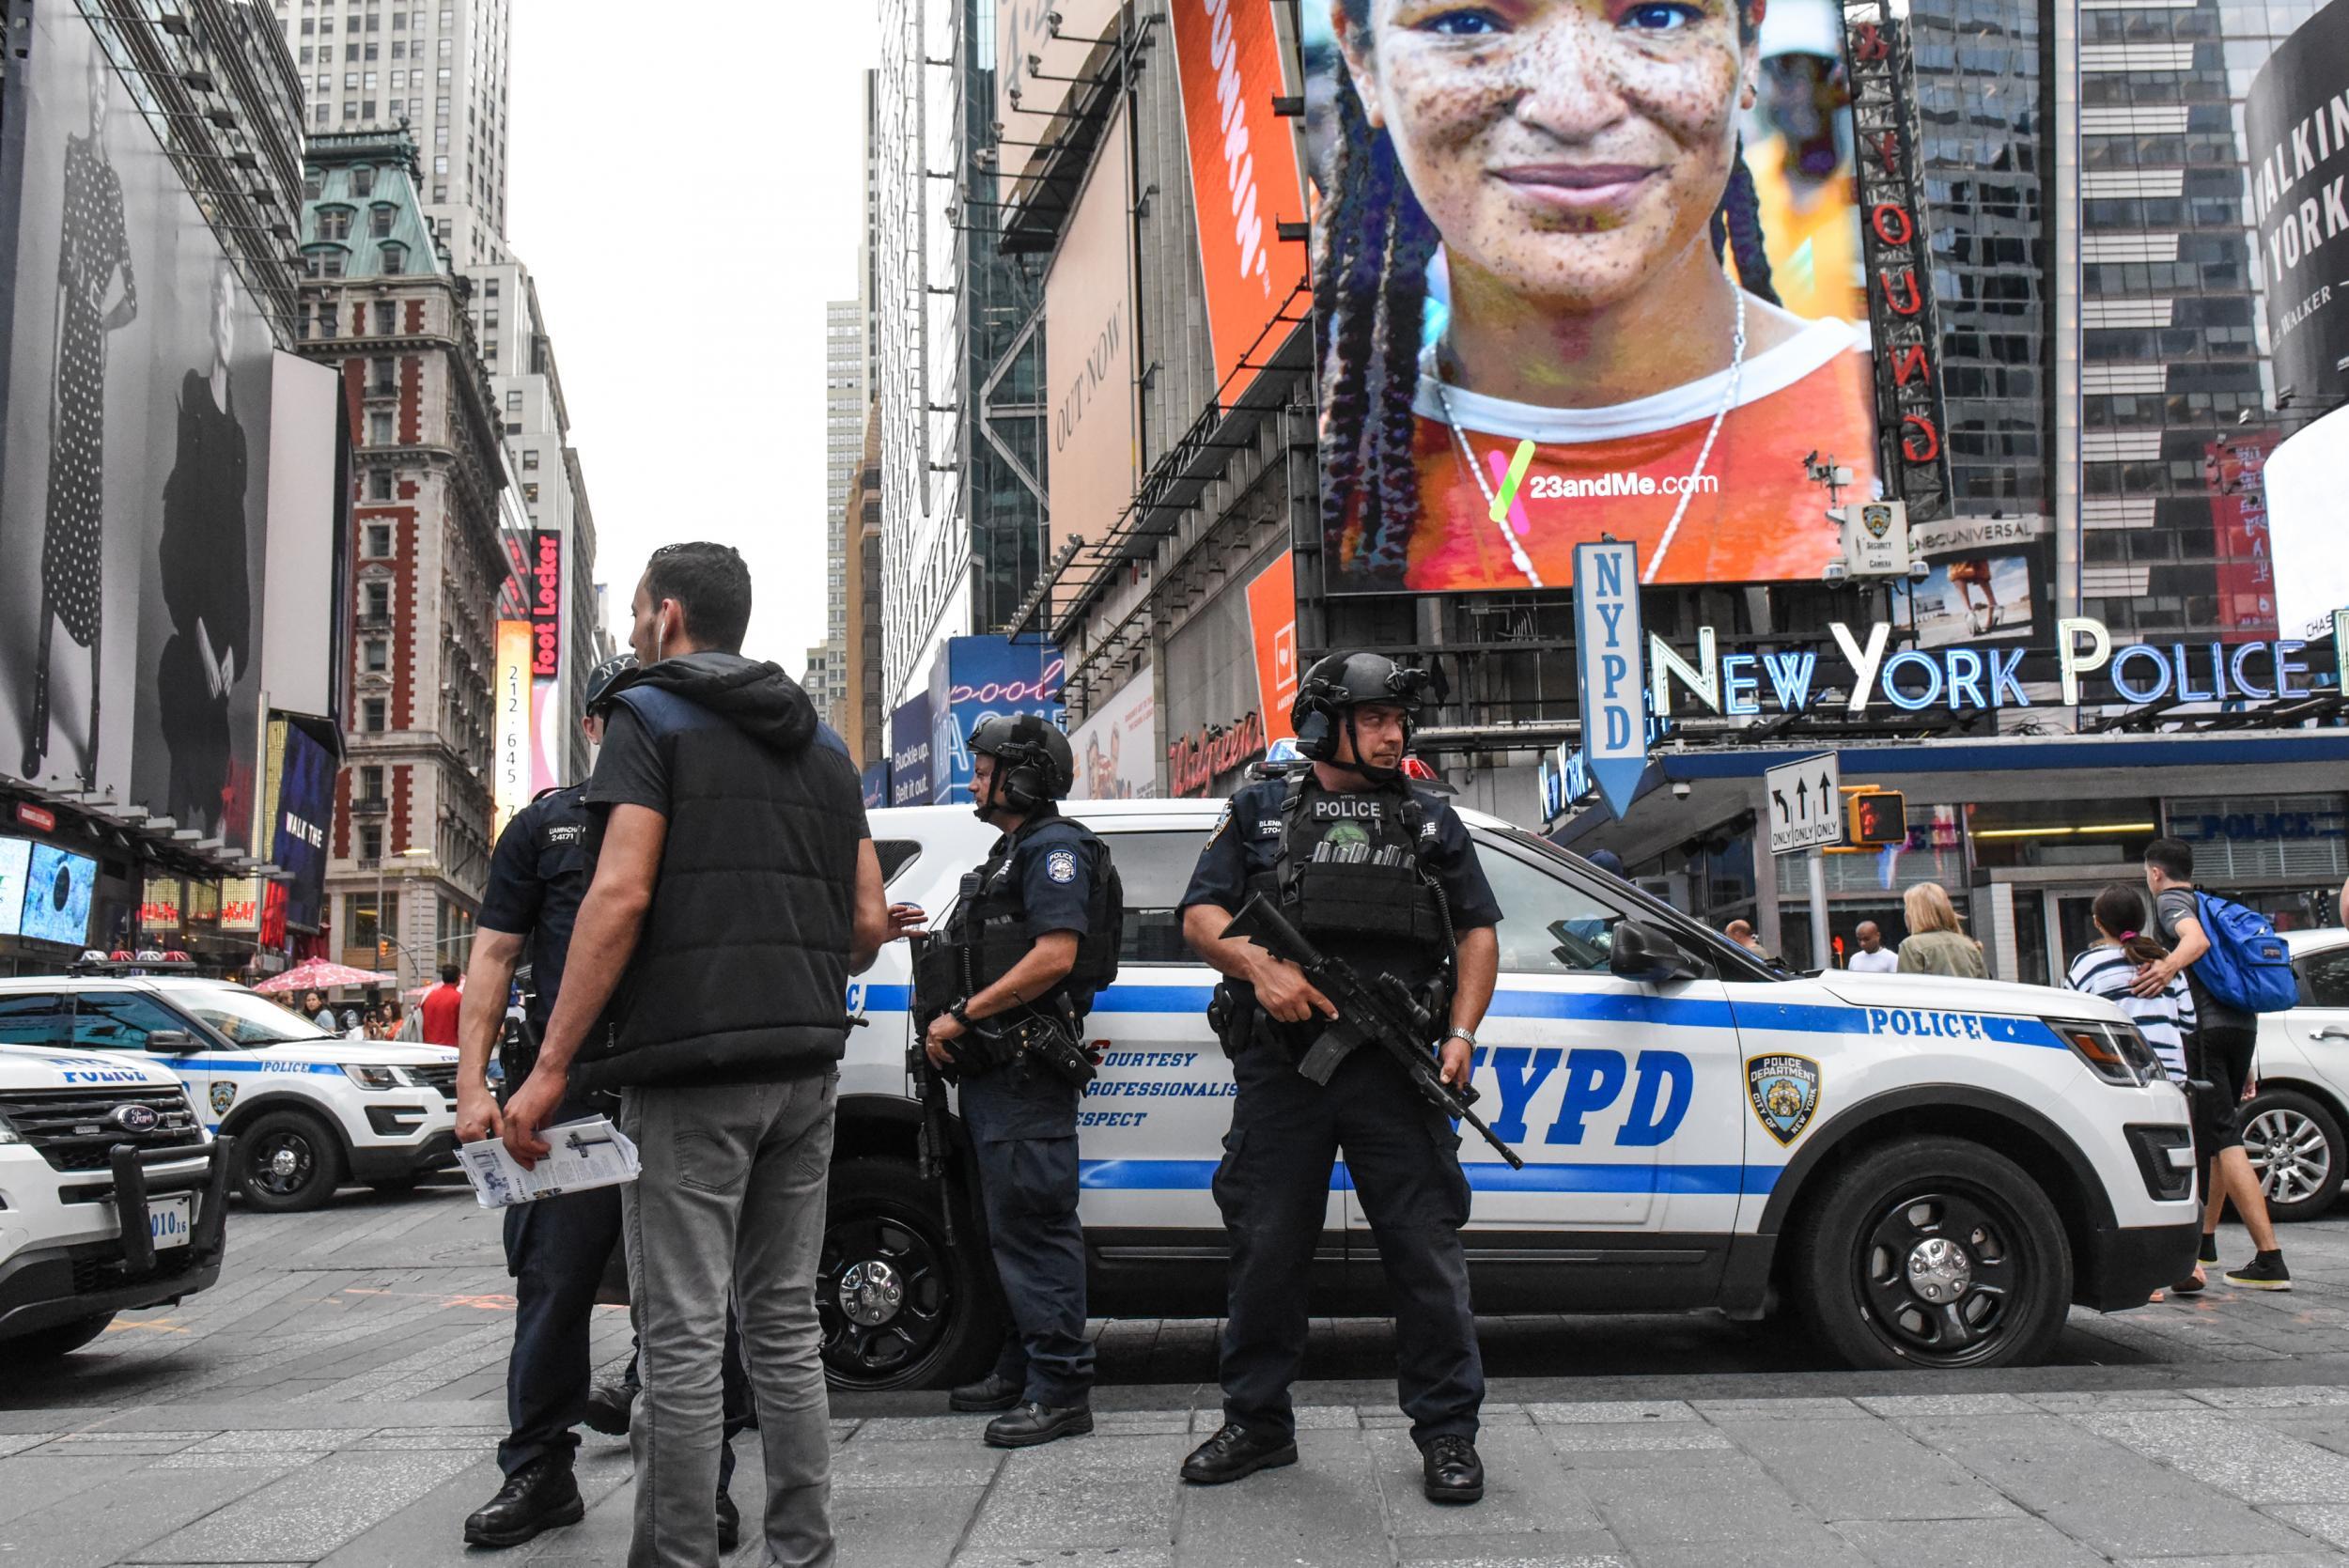 Members of the New York City Police Counterterrorism force stand guard in Times Square